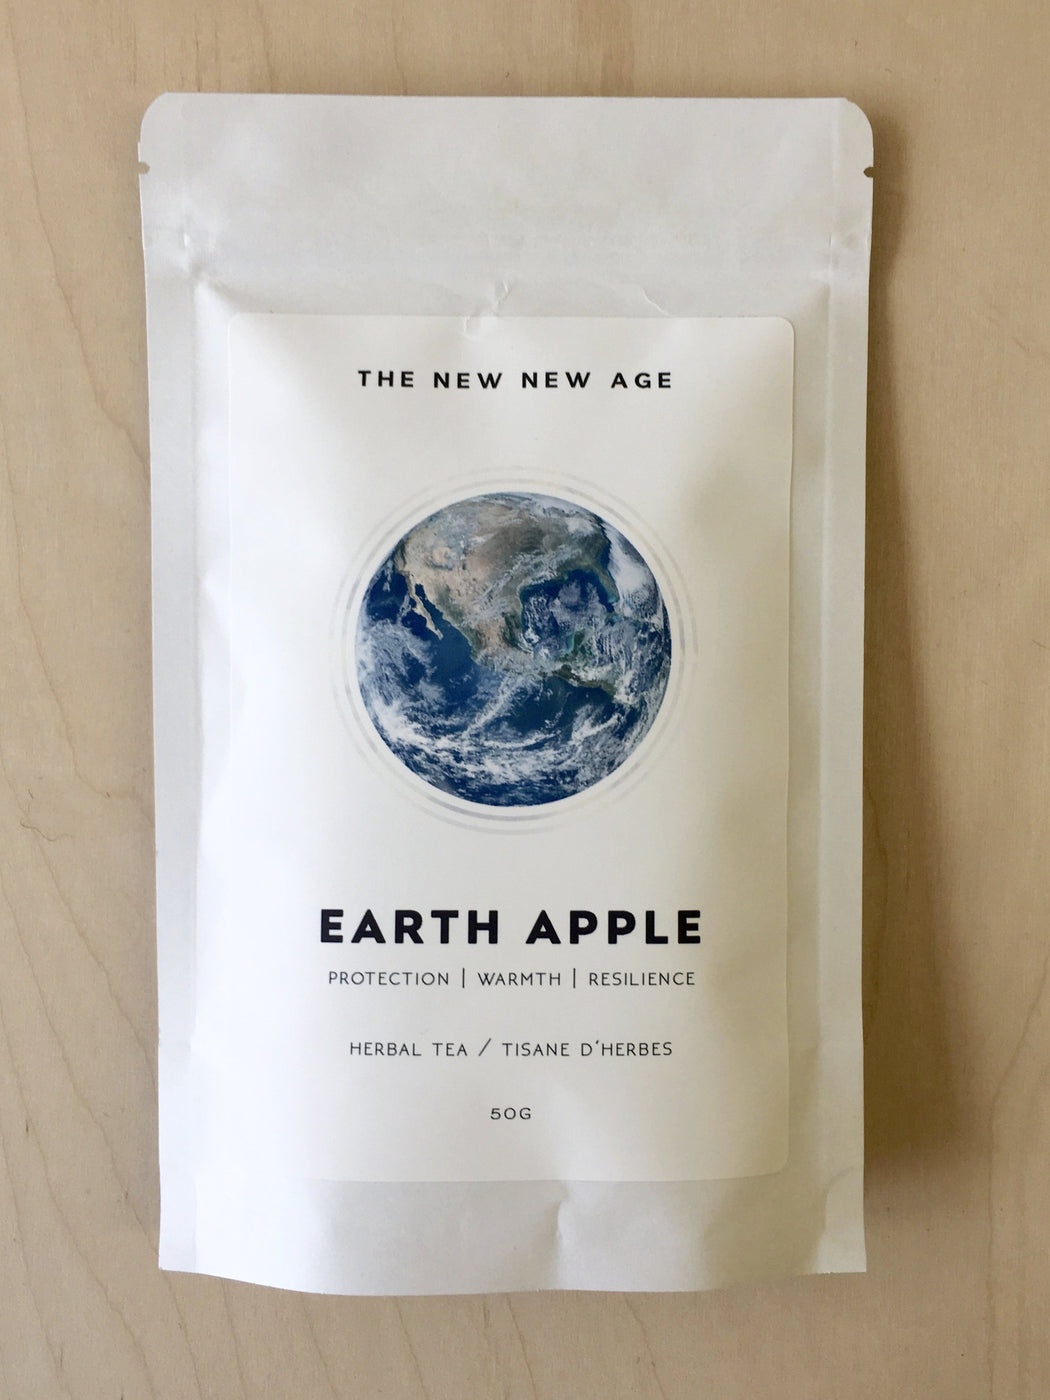 The New New Age - Earth Apple